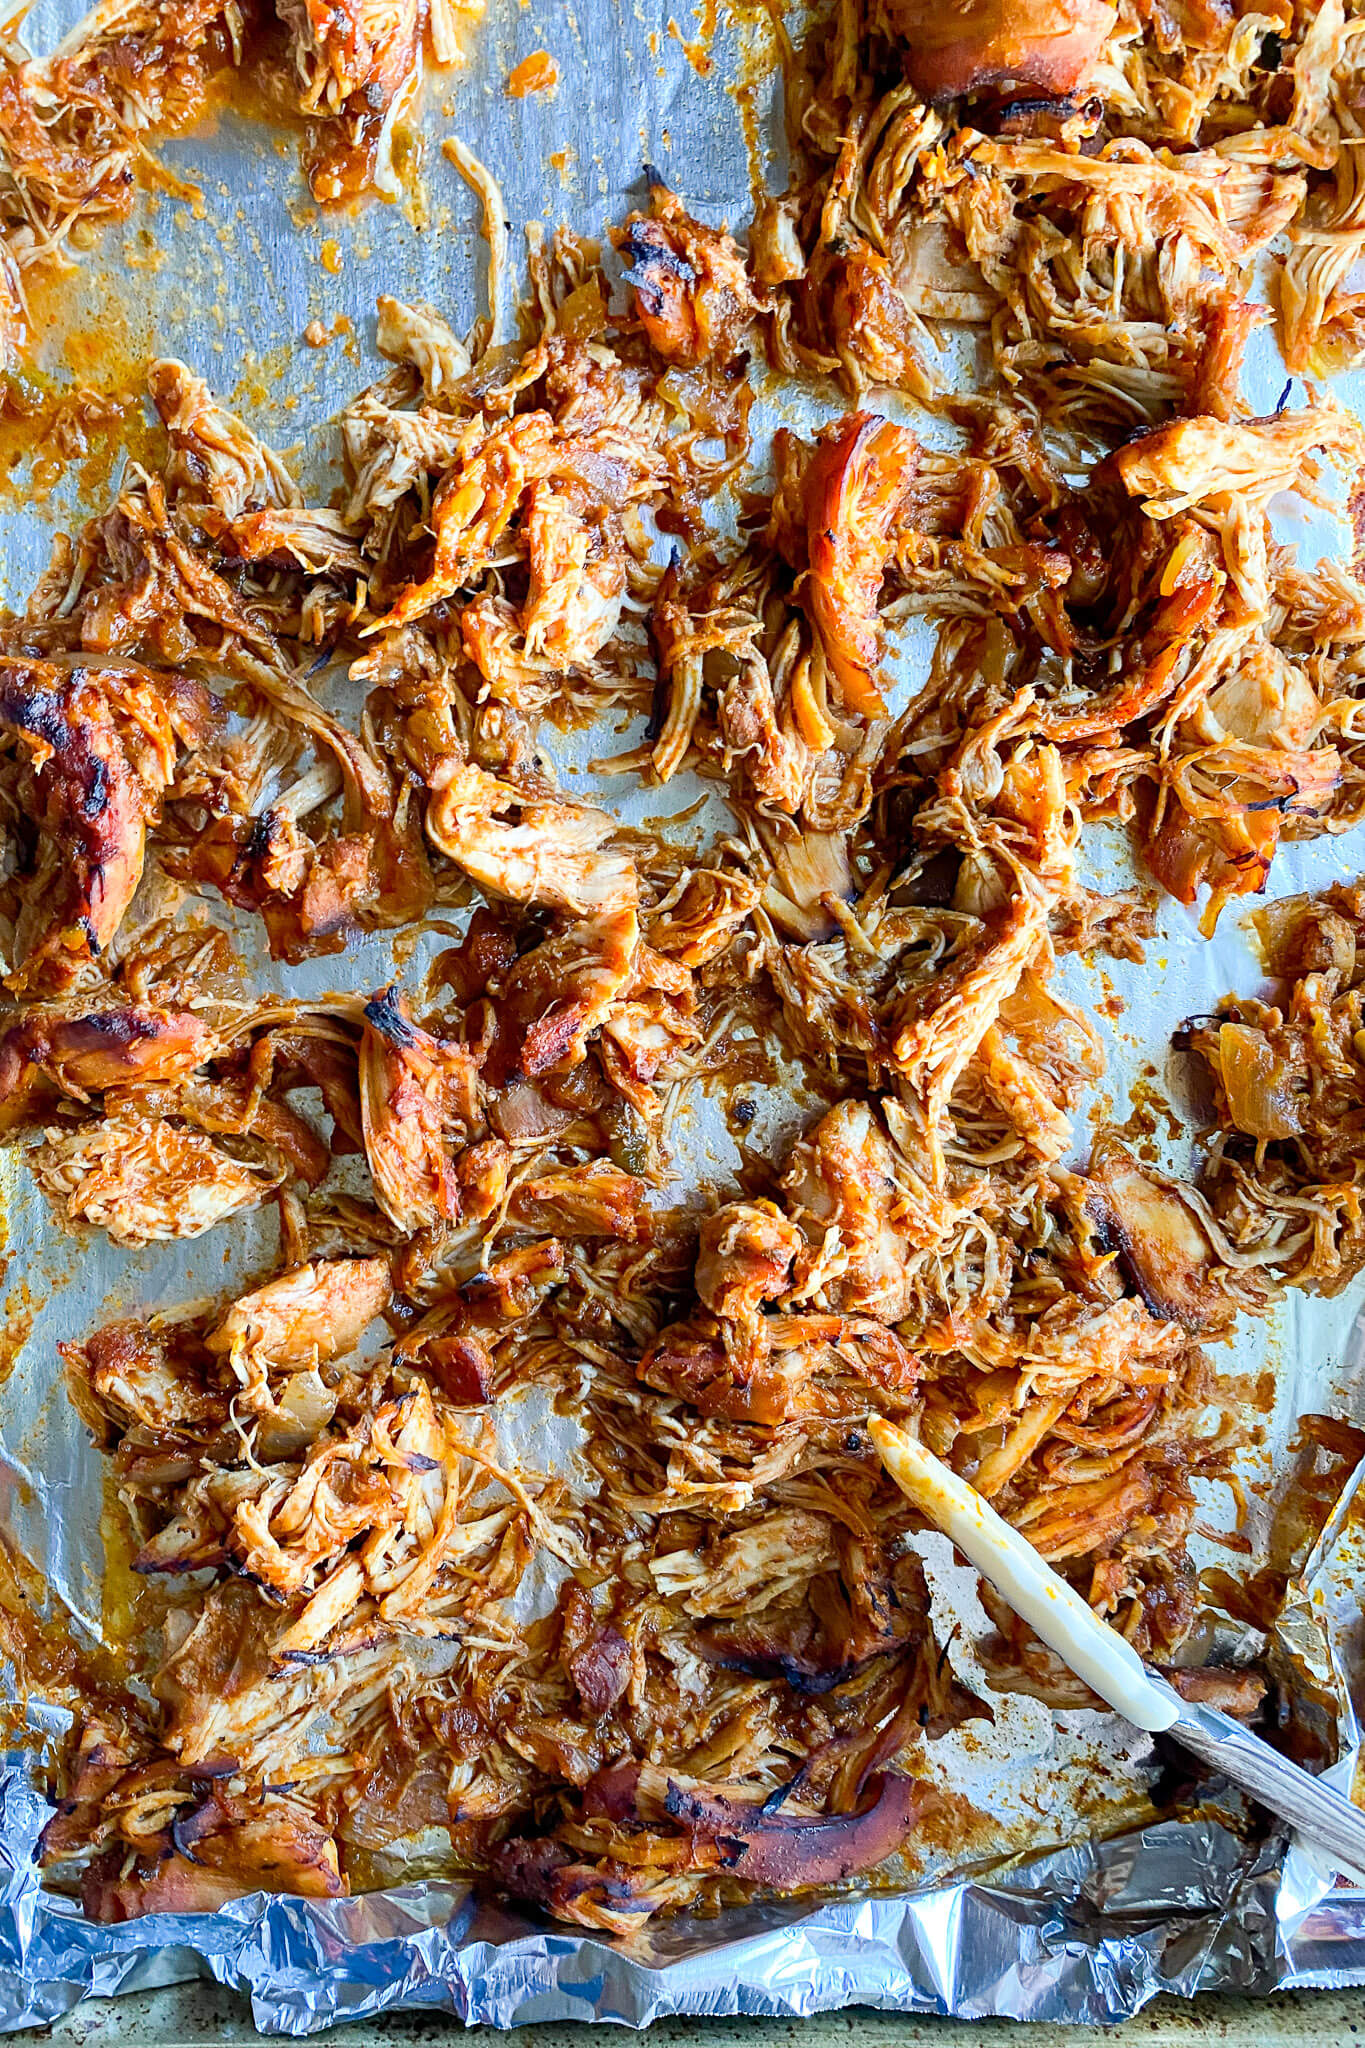 shredded chicken thats on a sheet pan that has been broiled in the oven